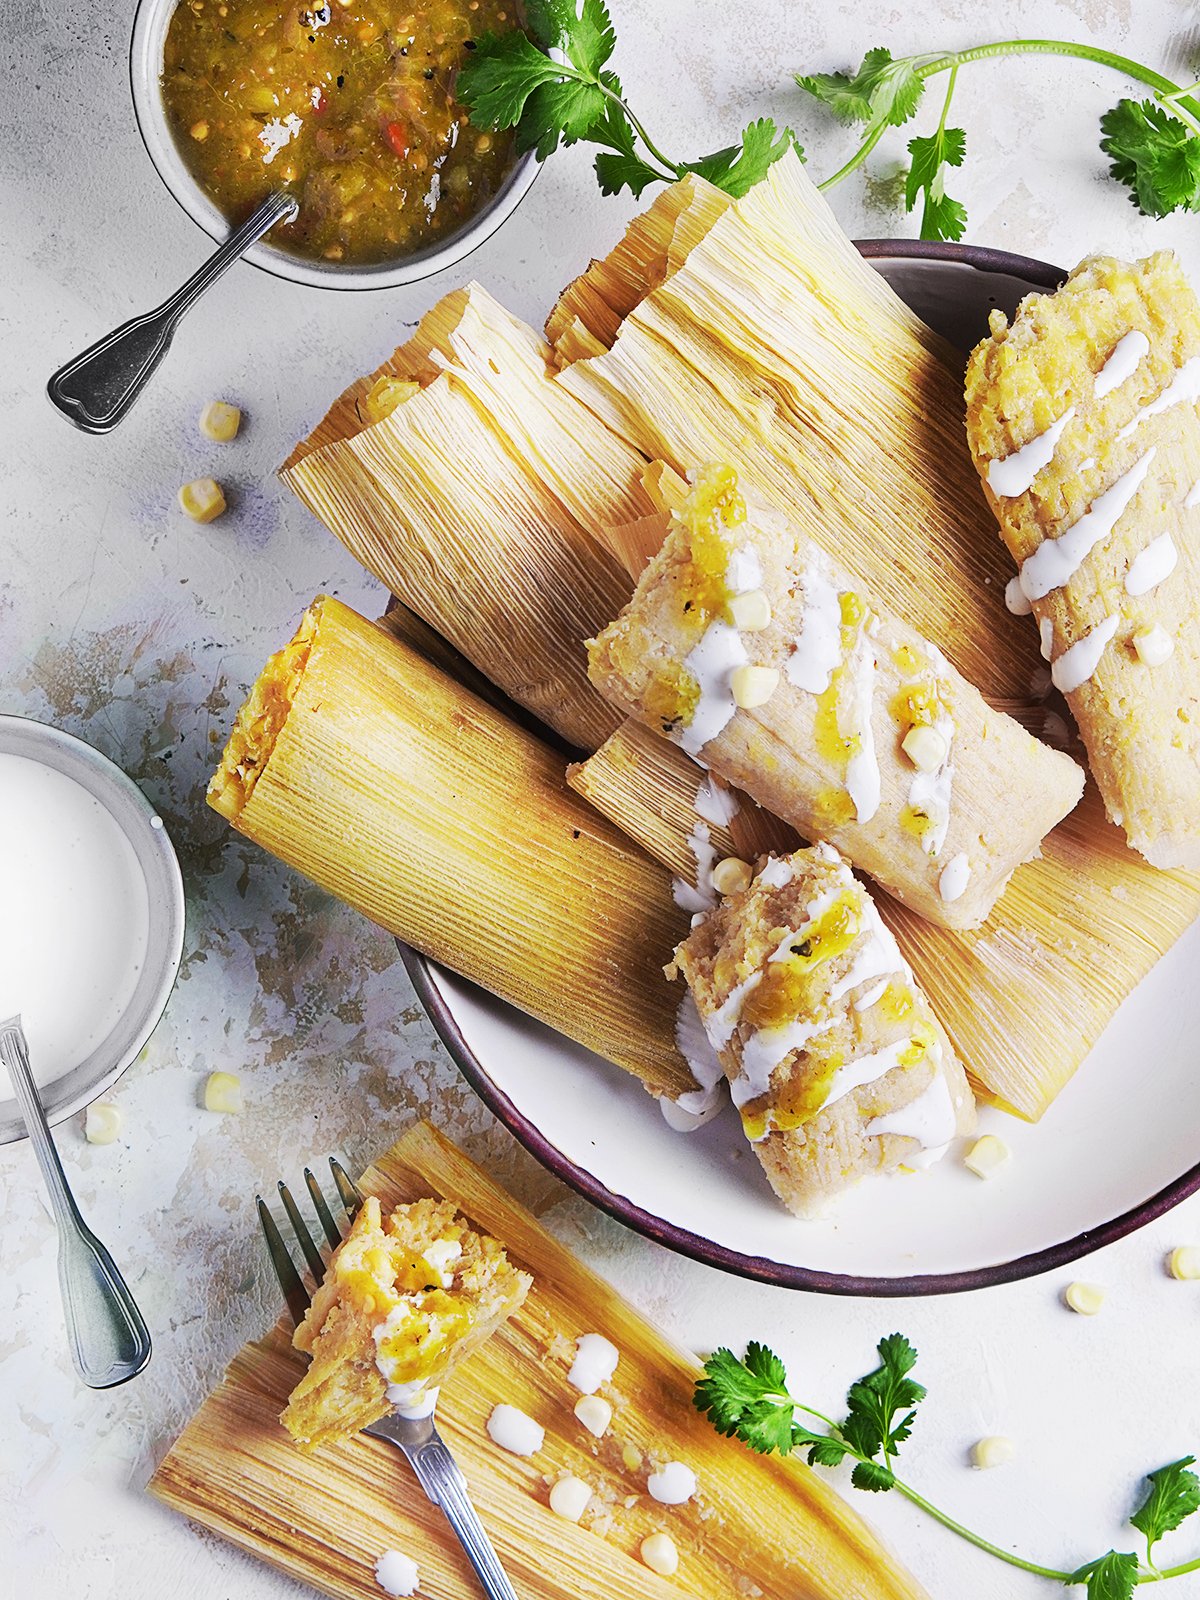 A large plate with corn tamales de elote still wrapped in husk